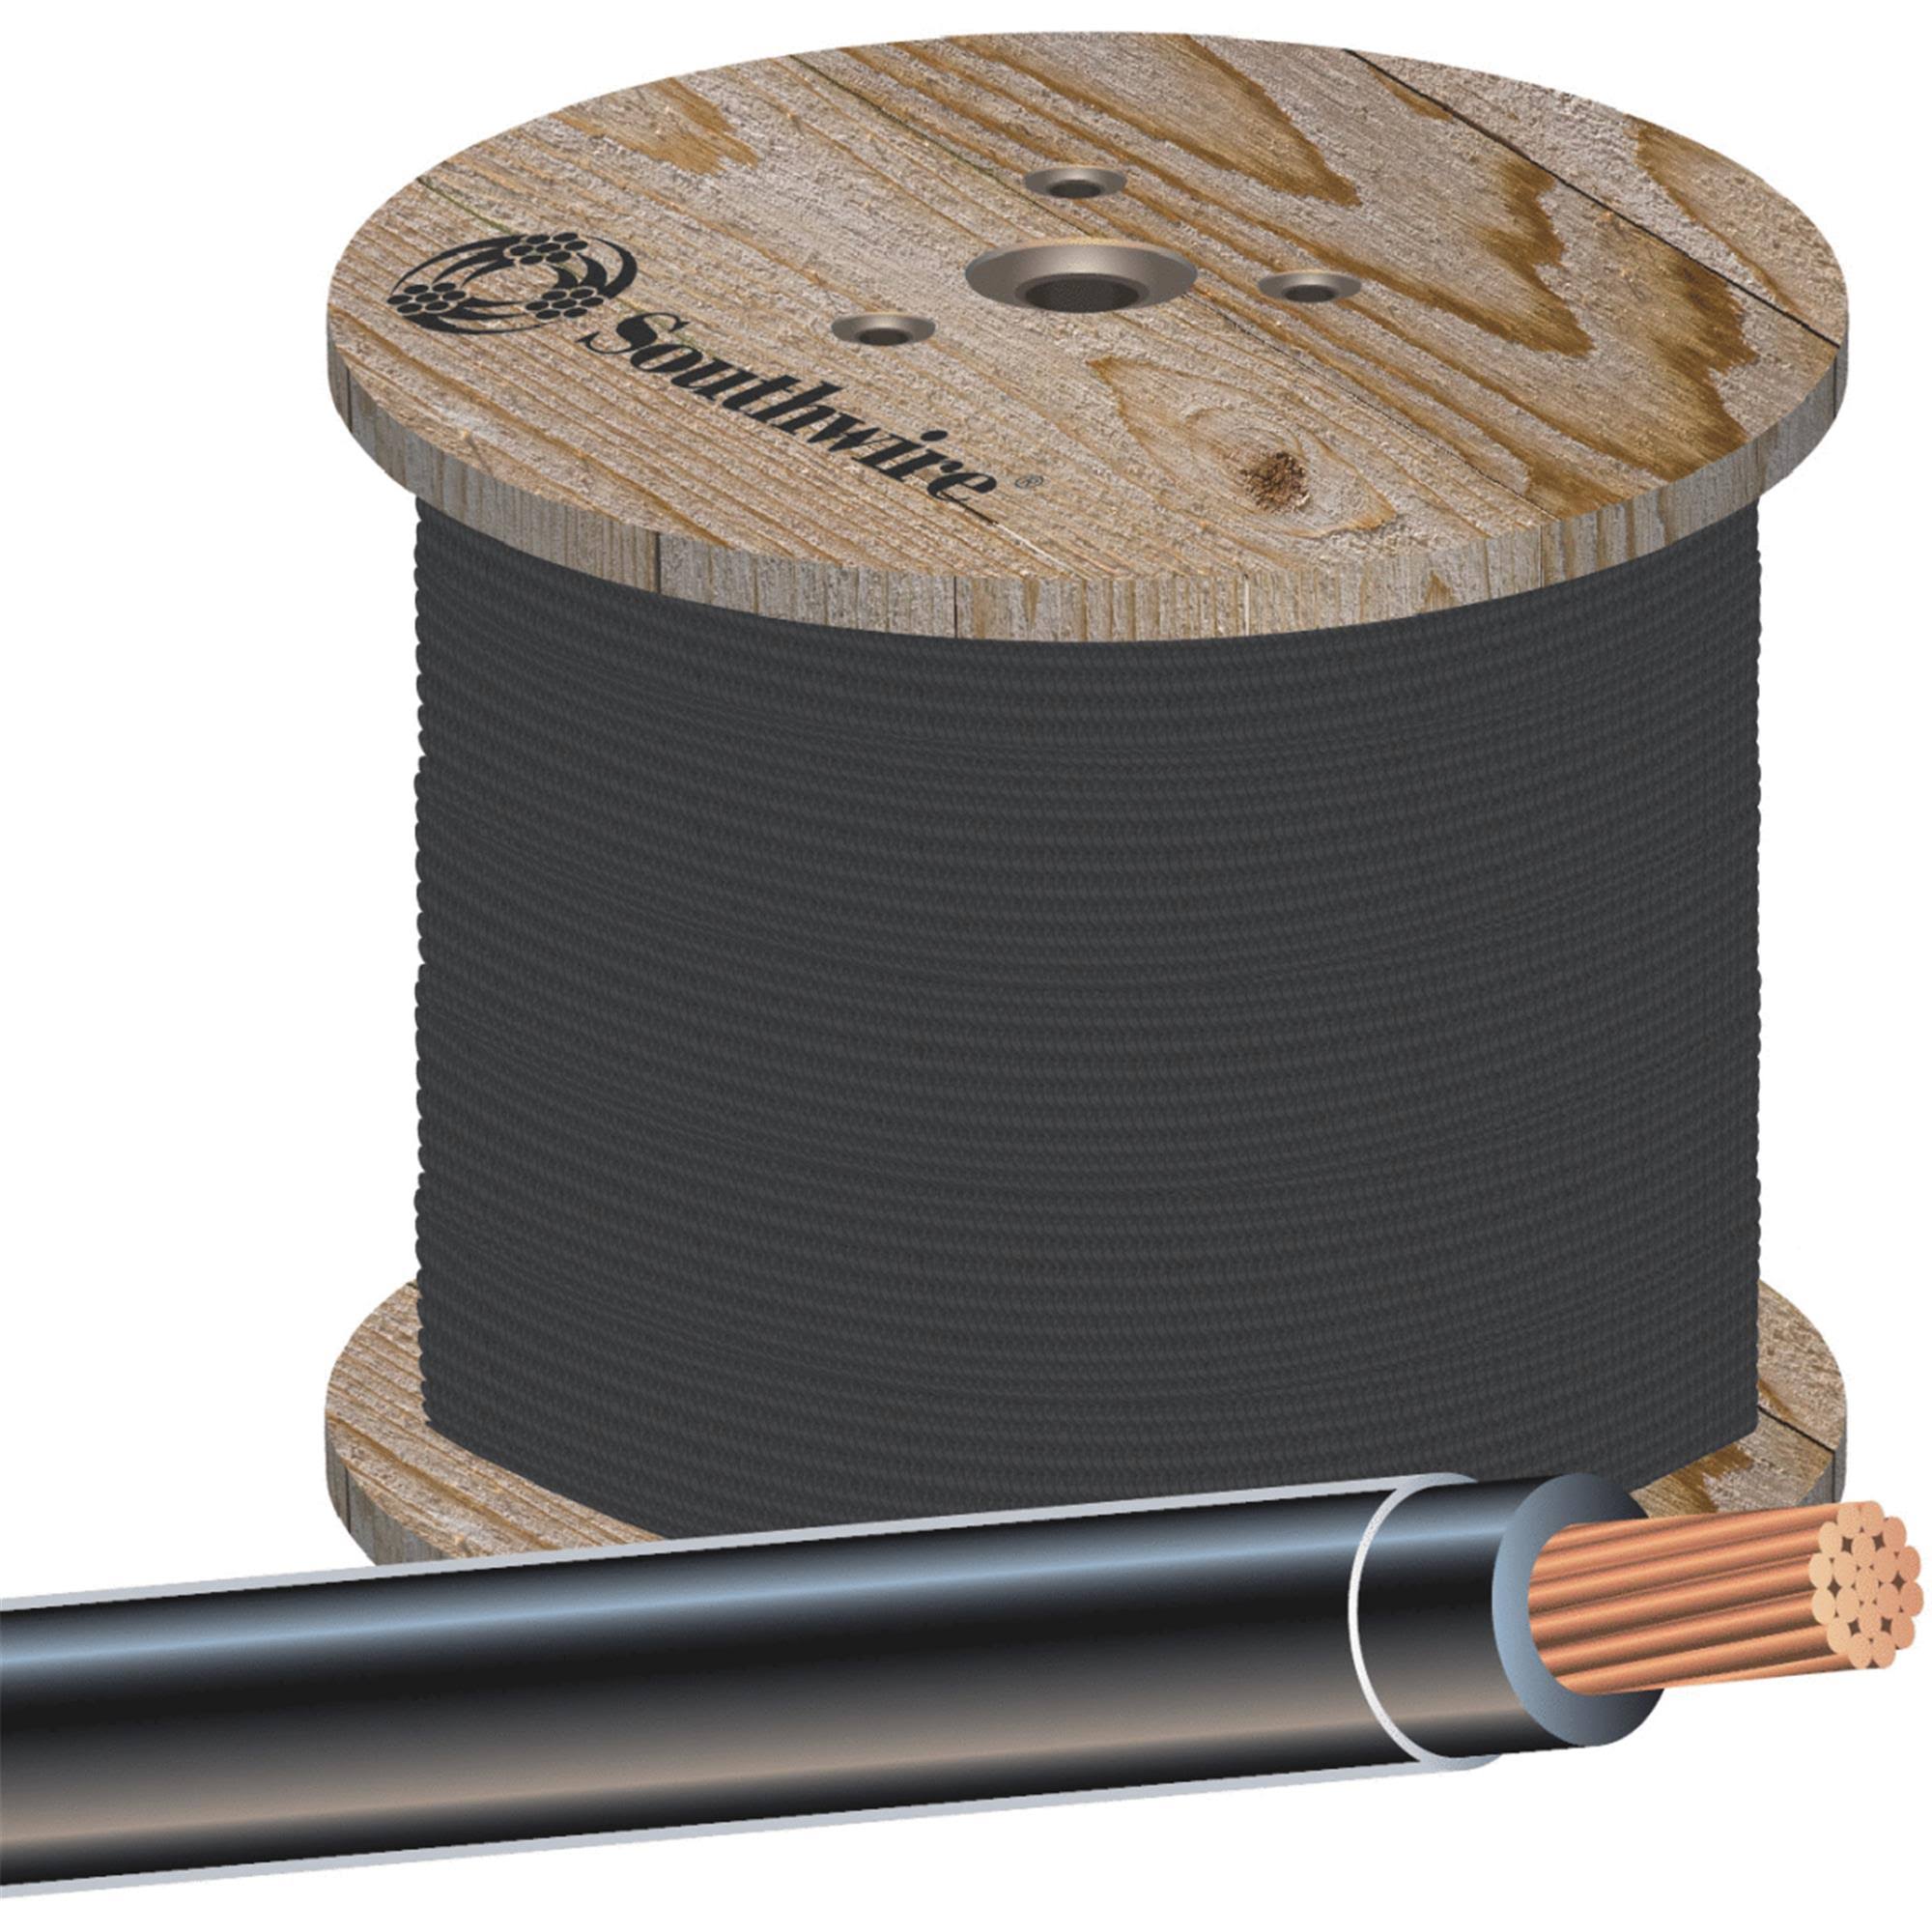 Southwire Stranded THHN Single Conductor Electrical Wire - Black